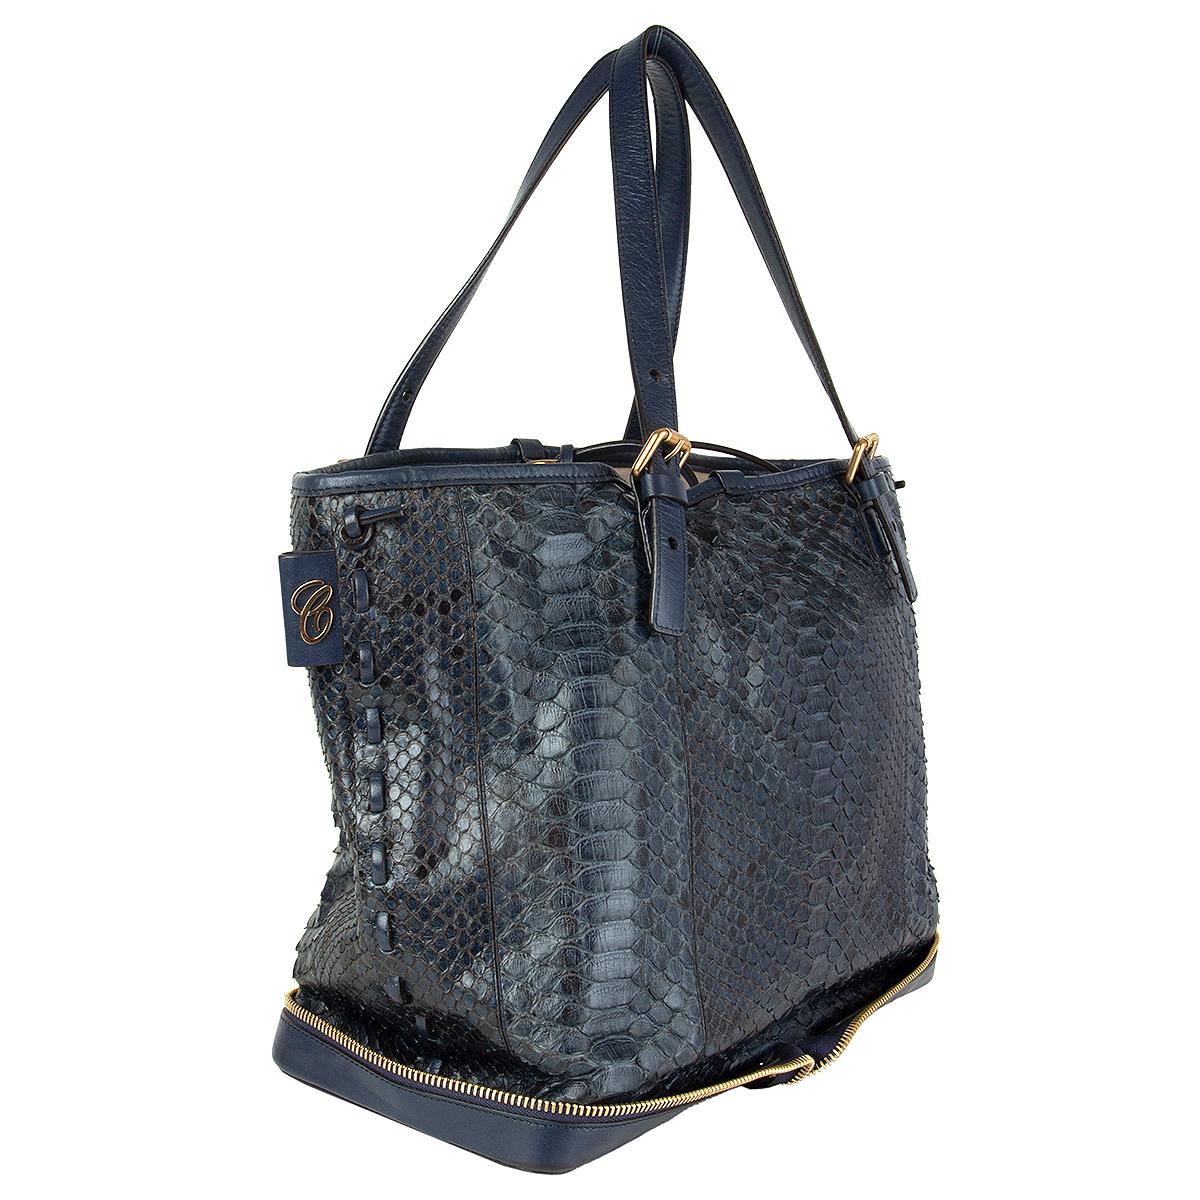 Chloé 'Ellen Moyen' tote bag in deep petrol python with navy leather bottom, handles and trimming featuring decorative zipper detail around the bottom part. Lined in beige canvas with one zipper pocket against the back and one open pocket against